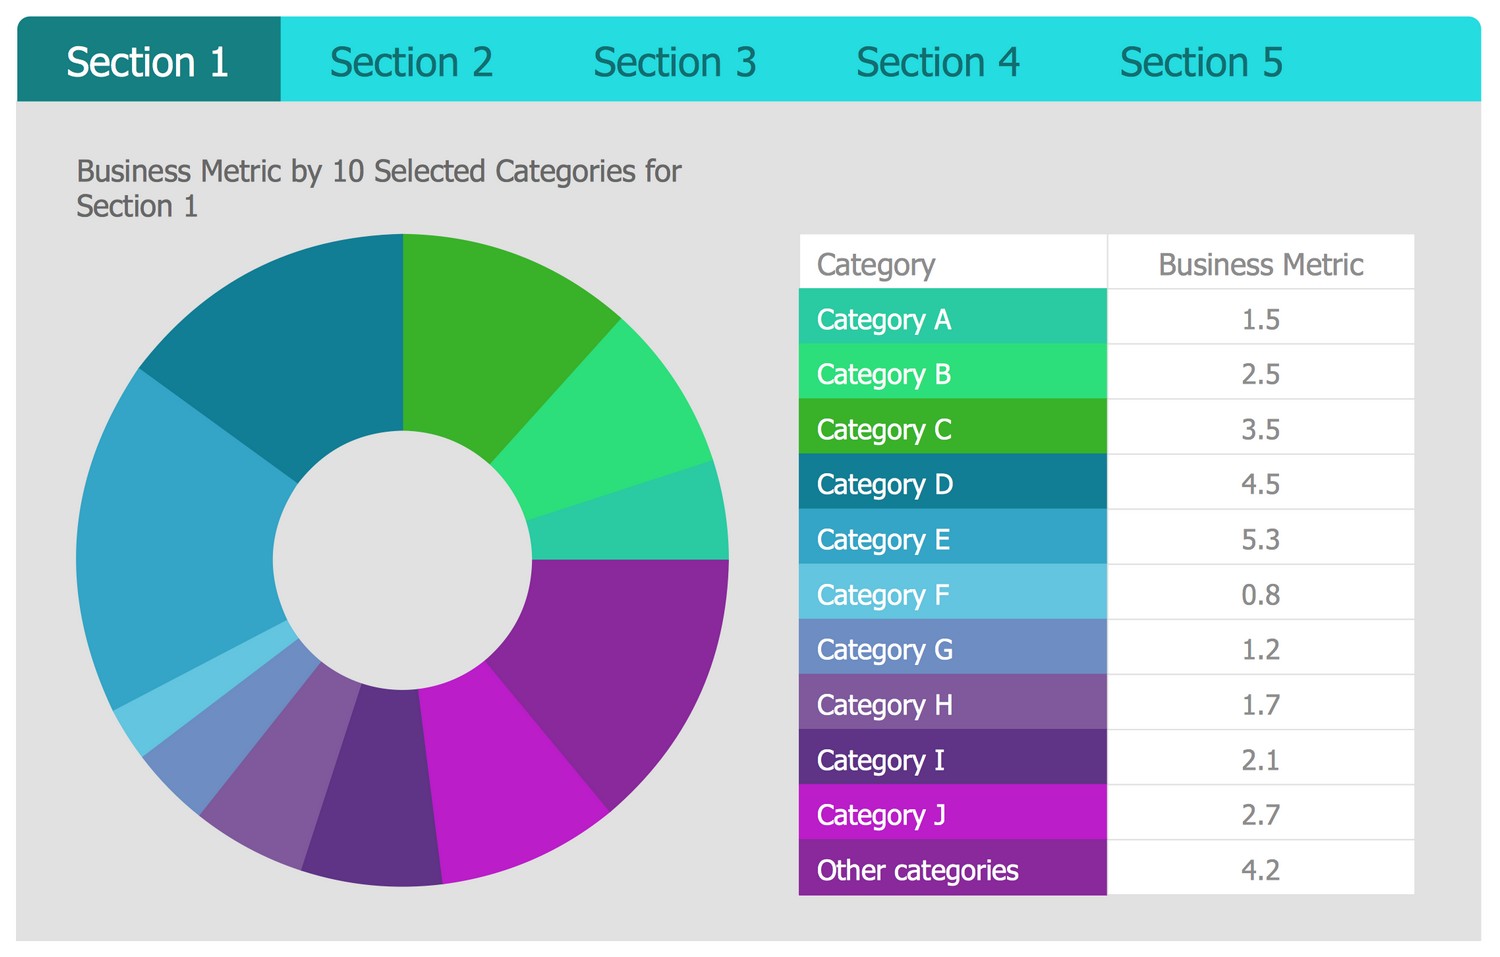 Business Intelligence Dashboard Template - Business Metric by 10 Selected Categories for 5 Sections